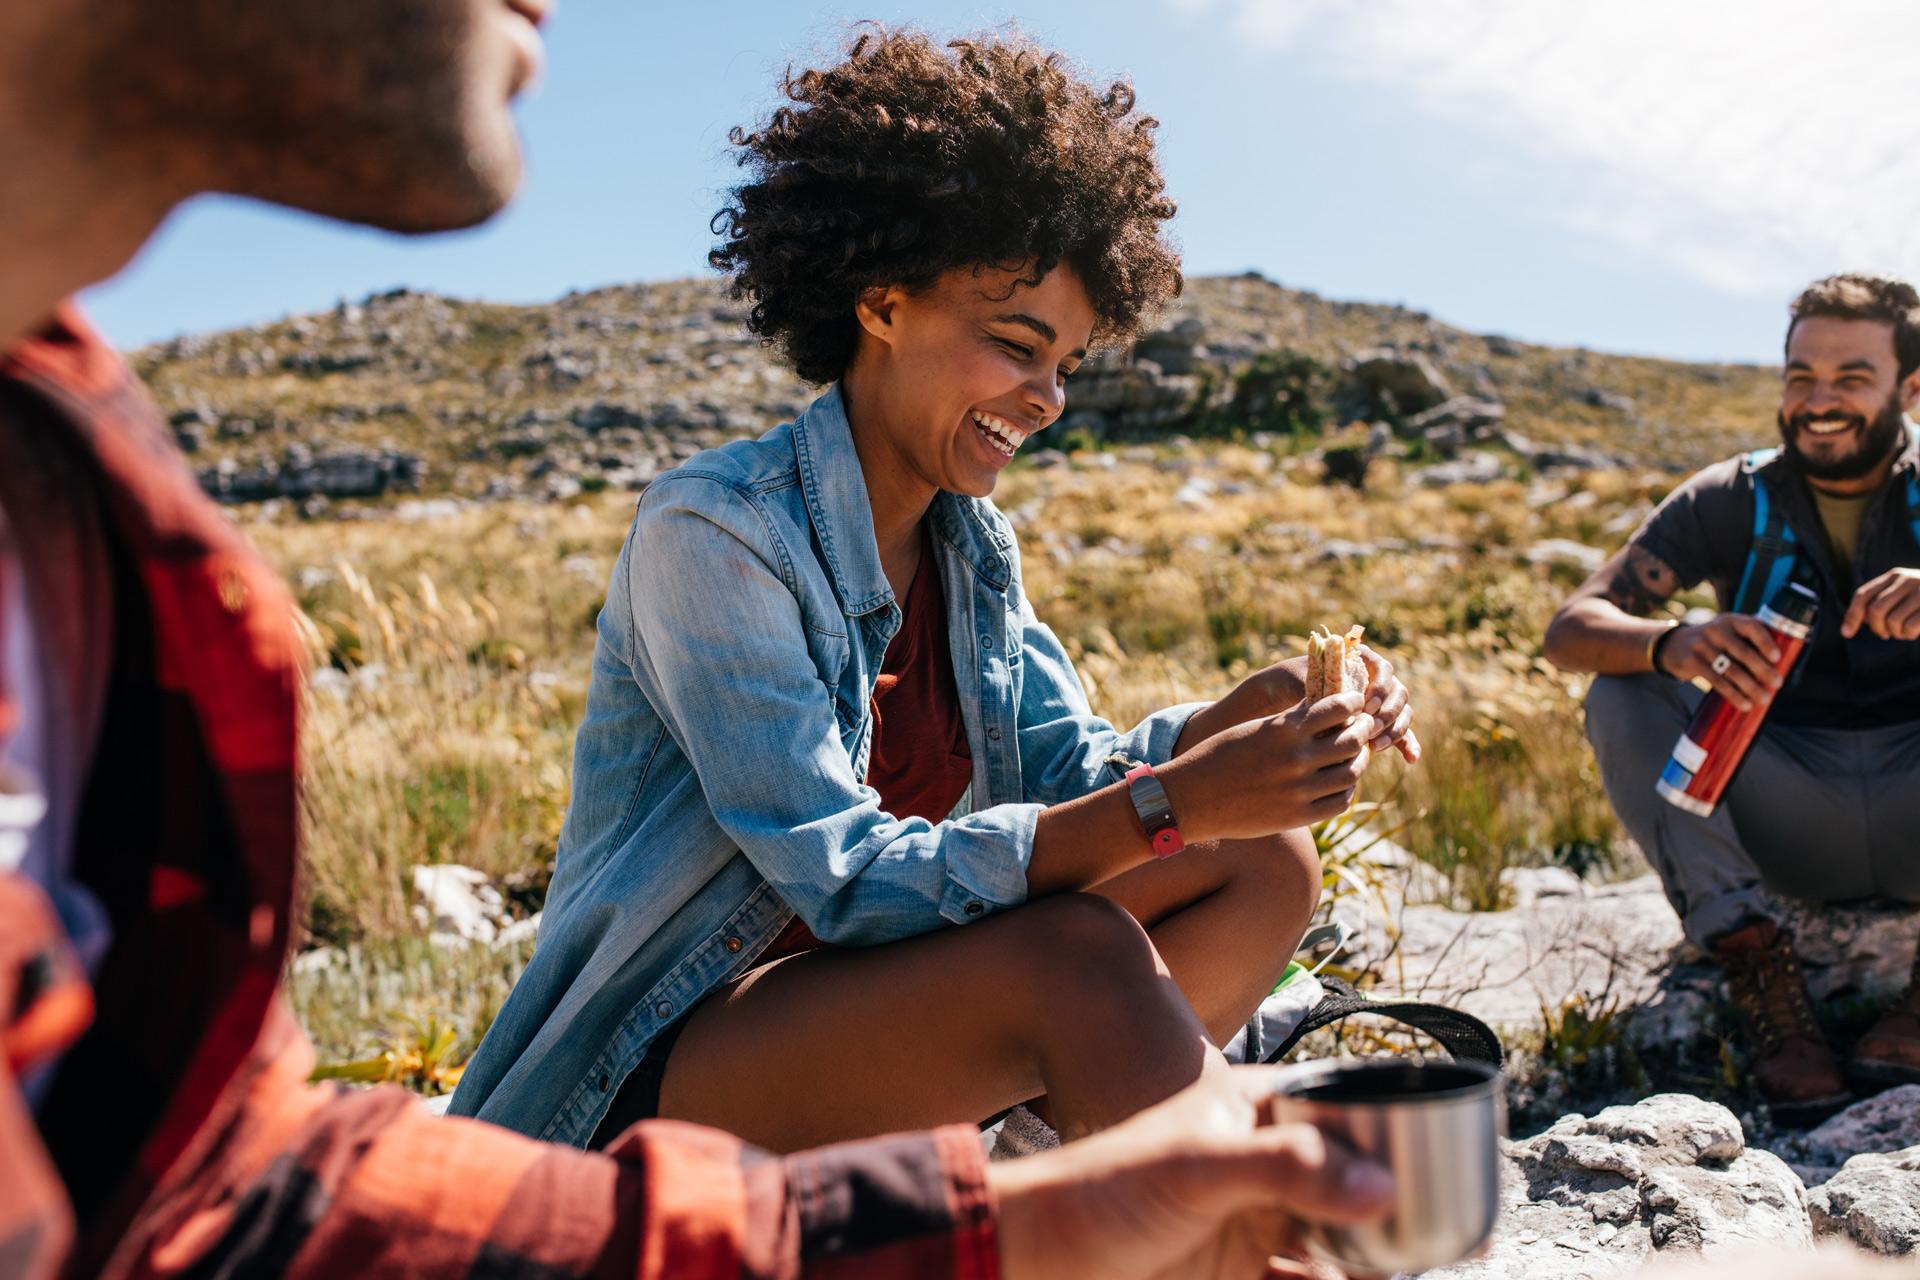 Group of happy people during a pic-nic outdoors, a woman in the middle eating a sandwich and wearing a red GEMA Fitness Tracker